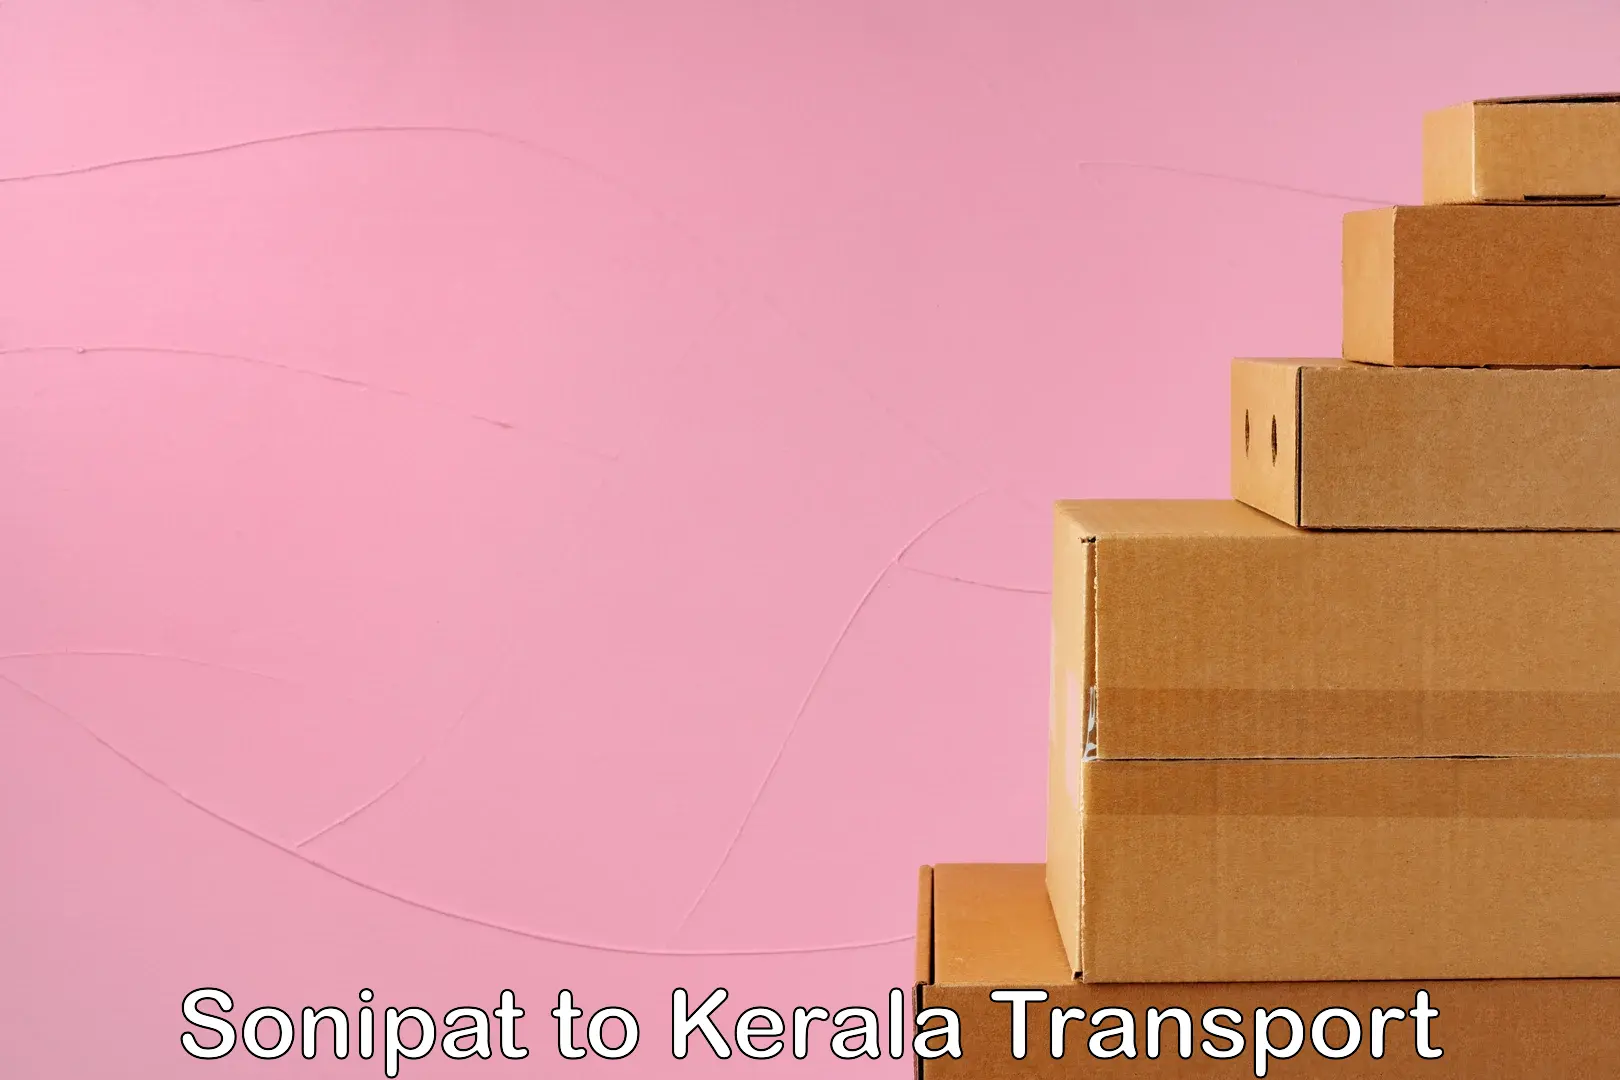 Commercial transport service Sonipat to Kerala